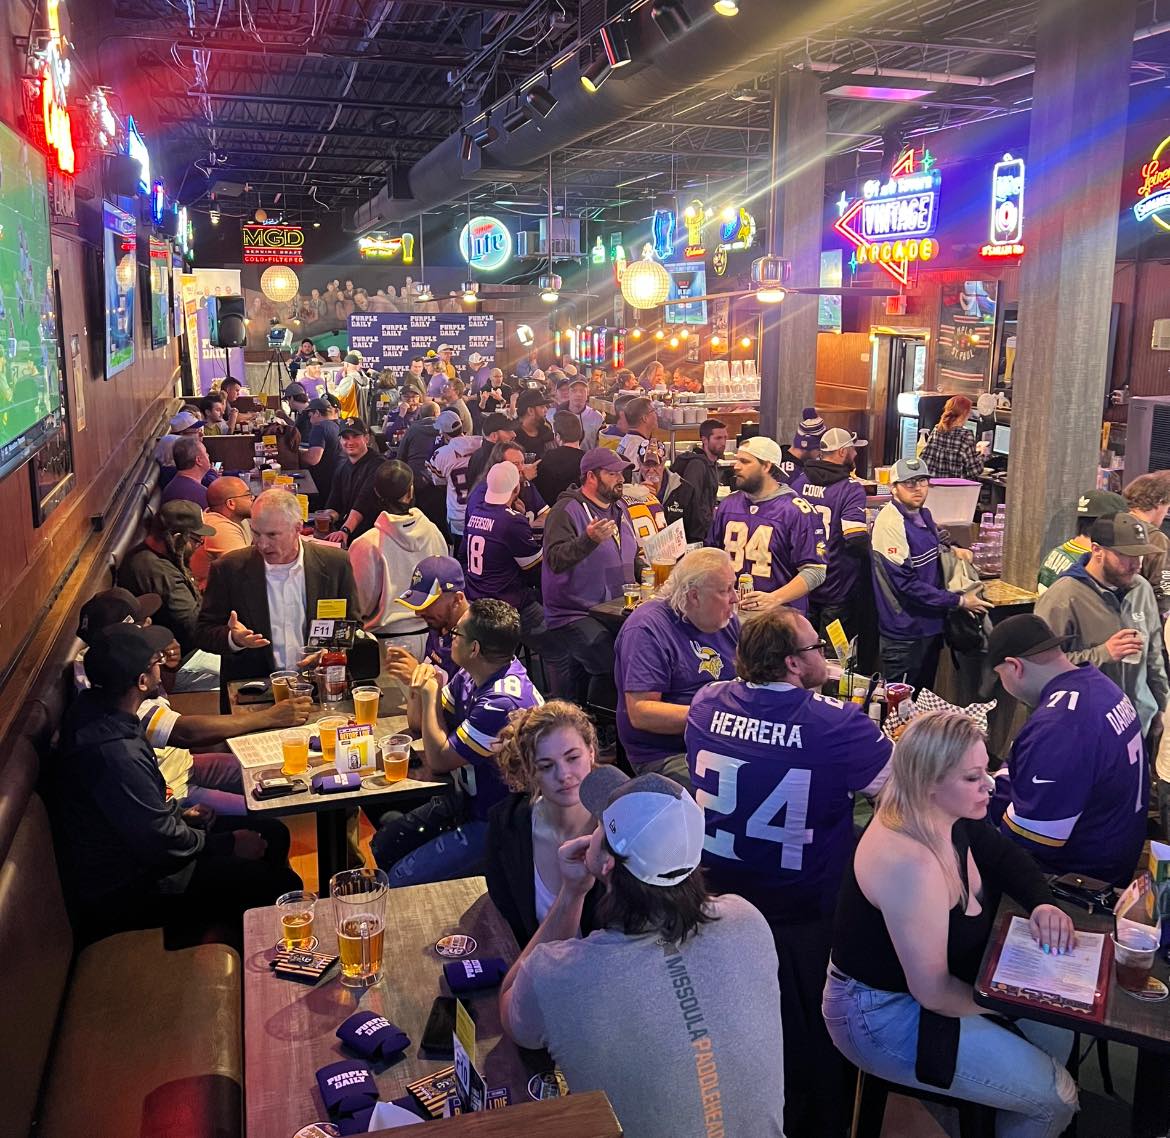 11th frame bar packed with Vikings fans